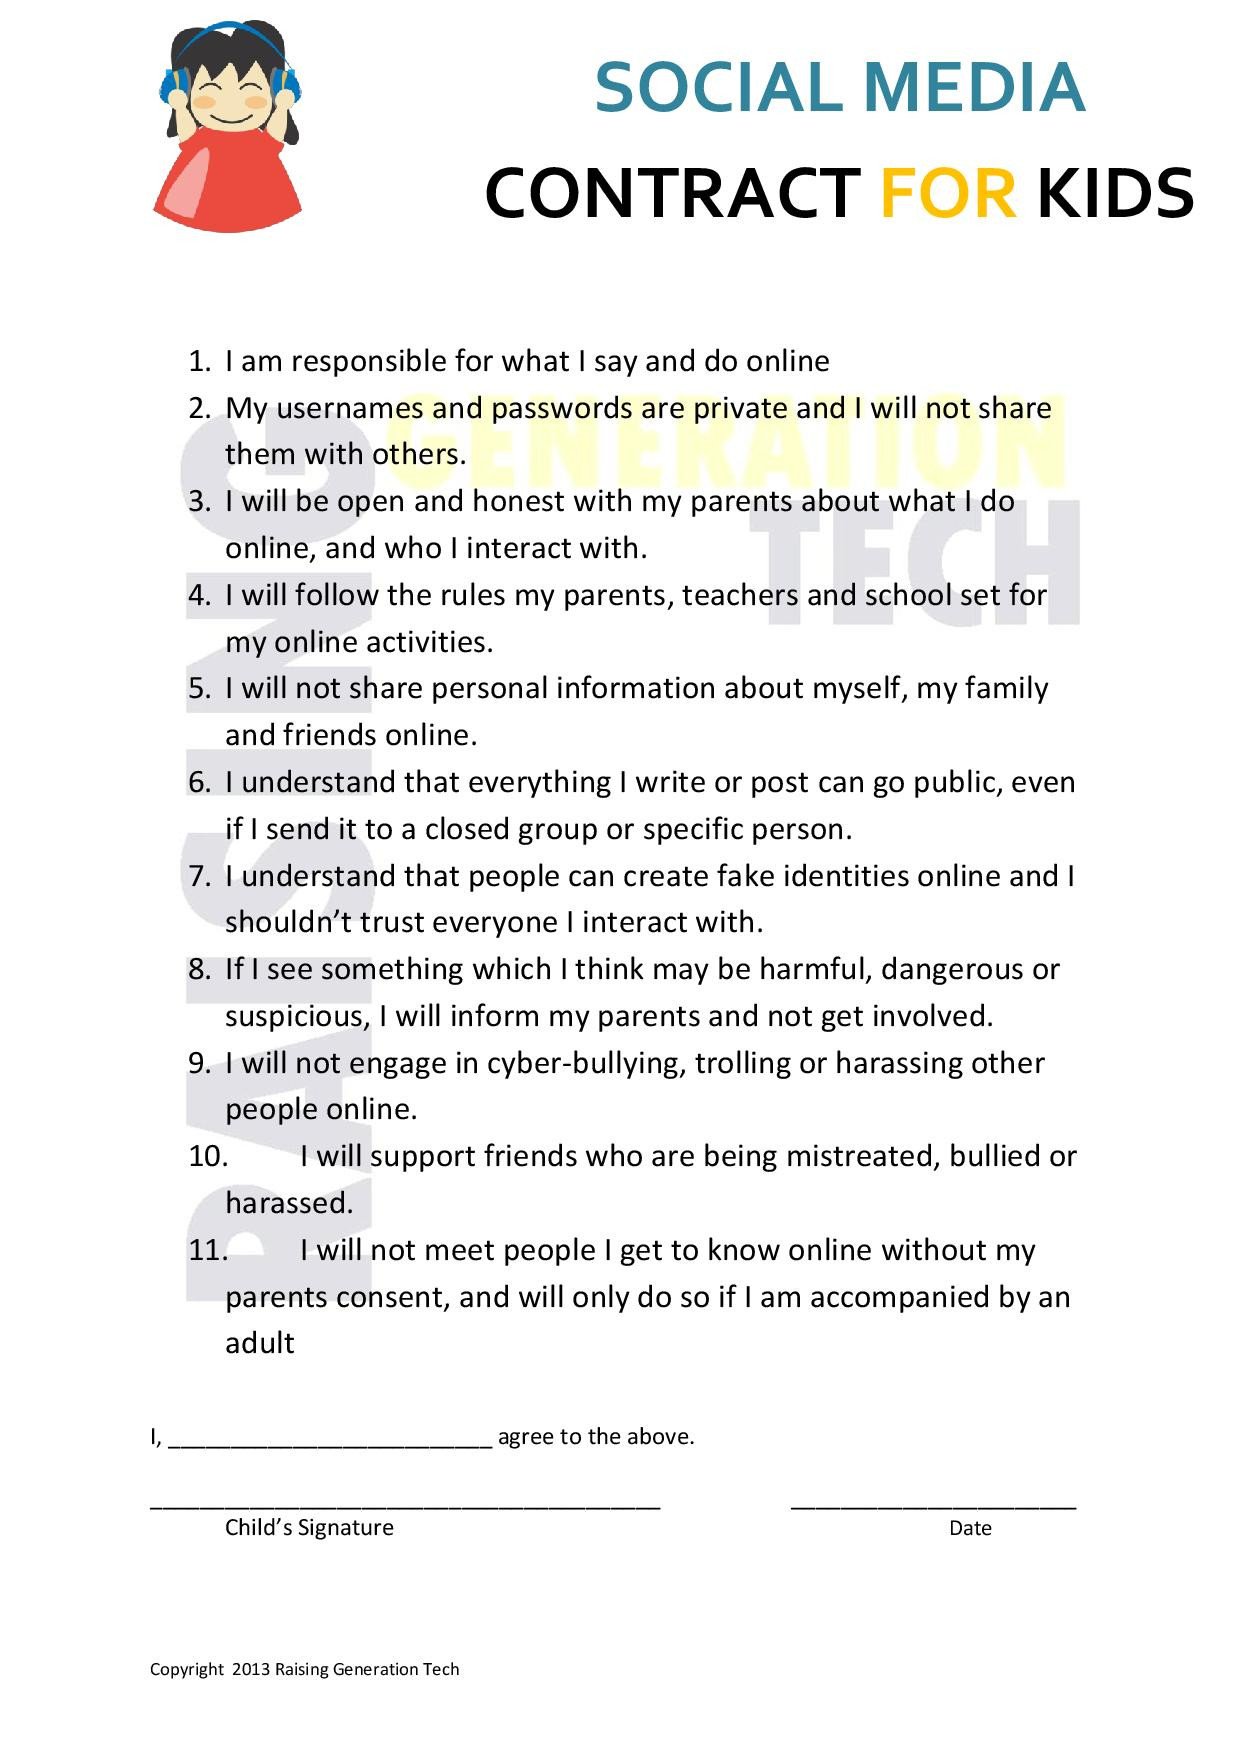 Social Media Contracts Templates social Media Contracts for Kids